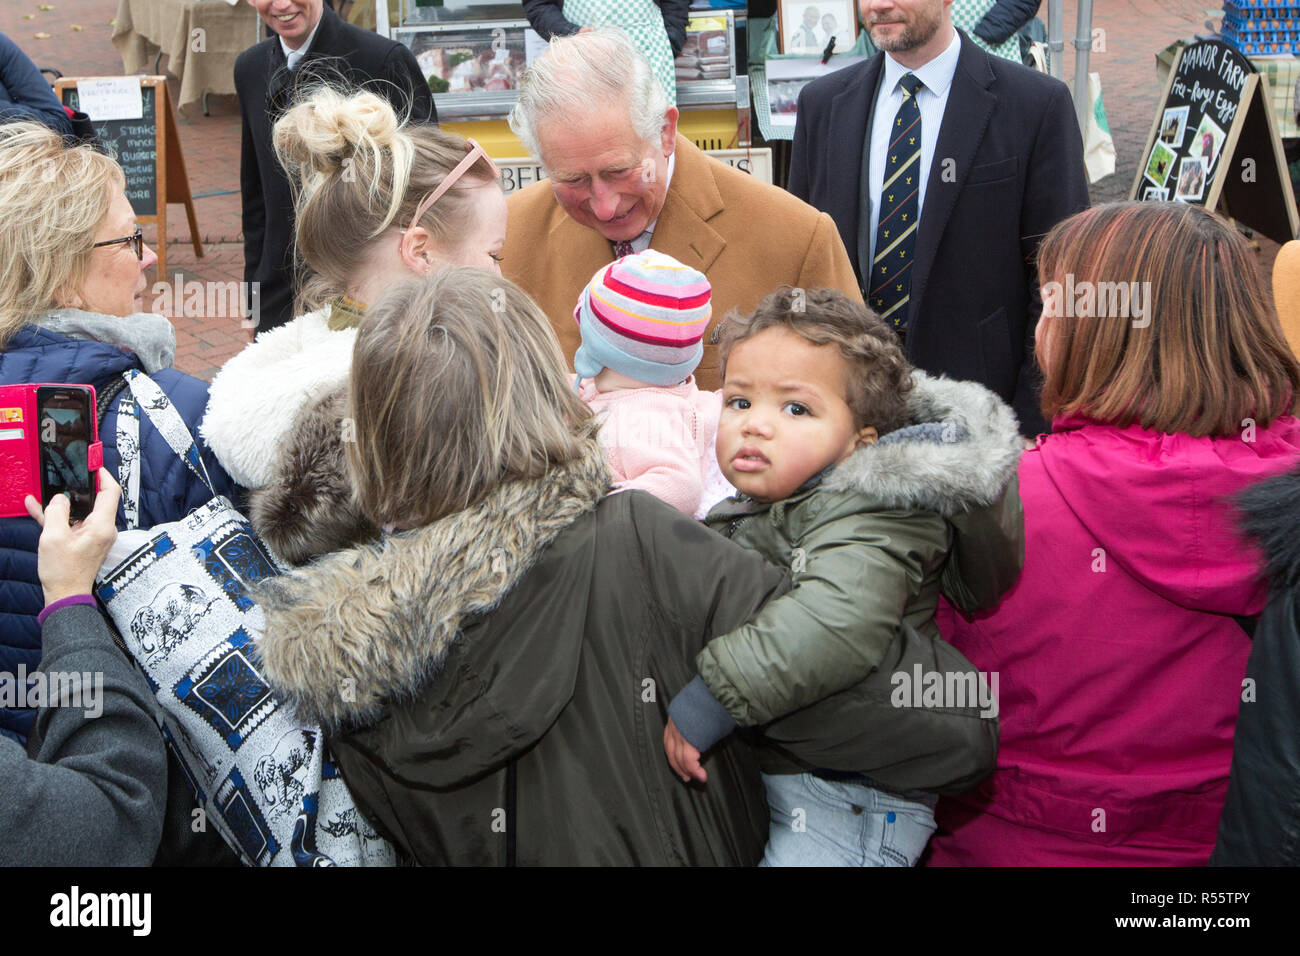 Prince Charles and Camilla,Duchess of Cornwall,visiting  Ely Farmers' Market in Cambridgeshire.   Prince Charles was given a big kiss by a woman in the crowd as he arrived at Ely Farmers' Market in Cambridgeshire today (Wed).  The Prince of Wales received the warm welcome as he met stallholders together with the Duchess of Cornwall.  The couple were introduced to a variety of traders, including producers of Aberdeen Angus beef, flower farmers, local growers of salad vegetables, chillies and soft fruit, as well as bakers and vegan food entrepreneurs. Stock Photo